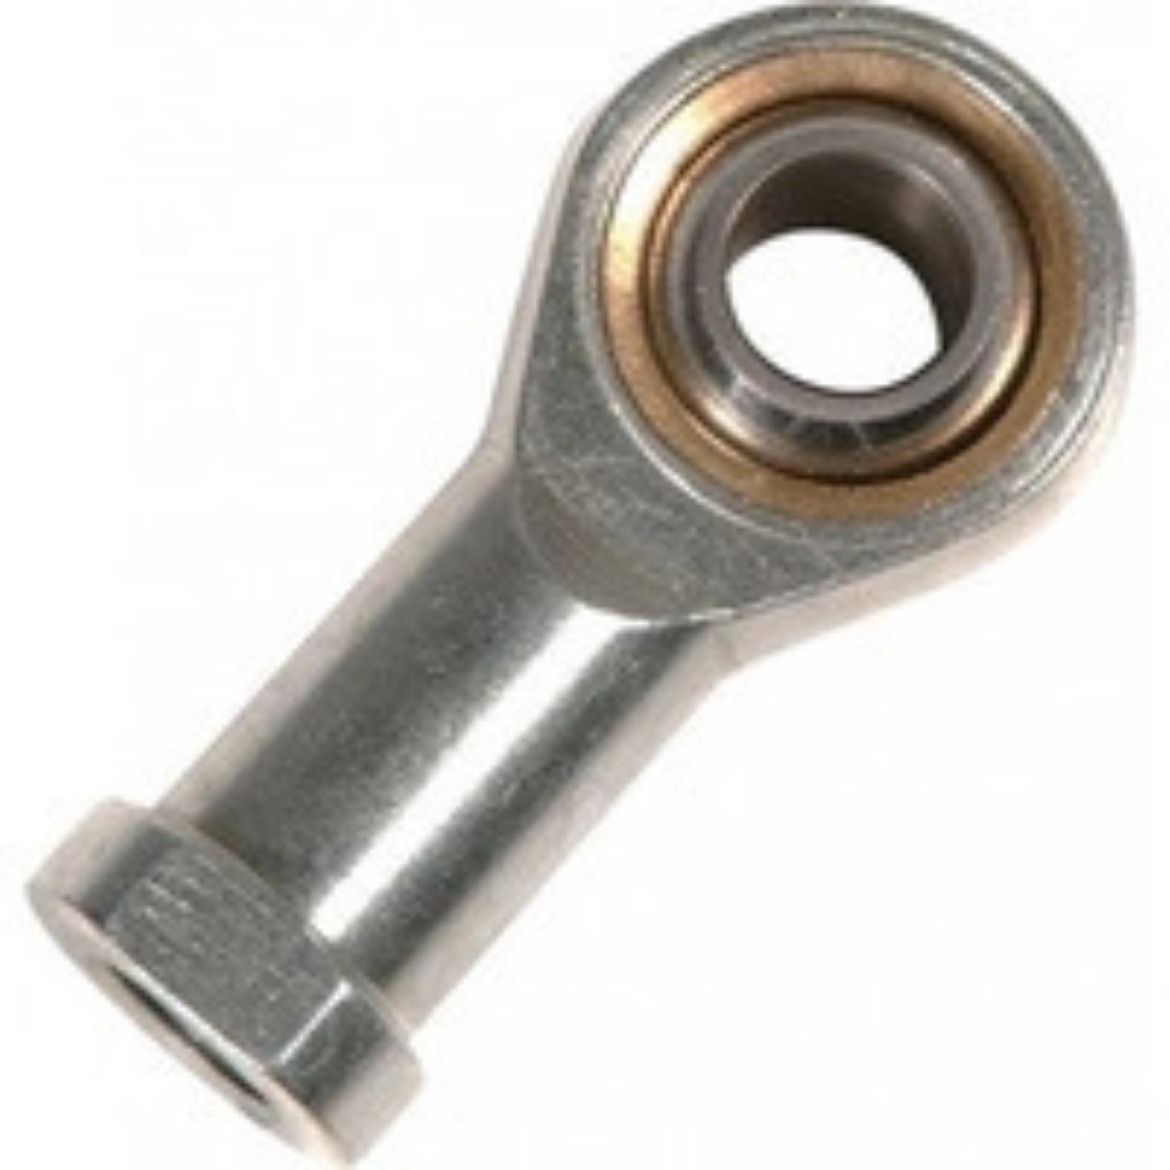 Picture of ROD END RH 3/16 BORE, 10-32 FEMALE END